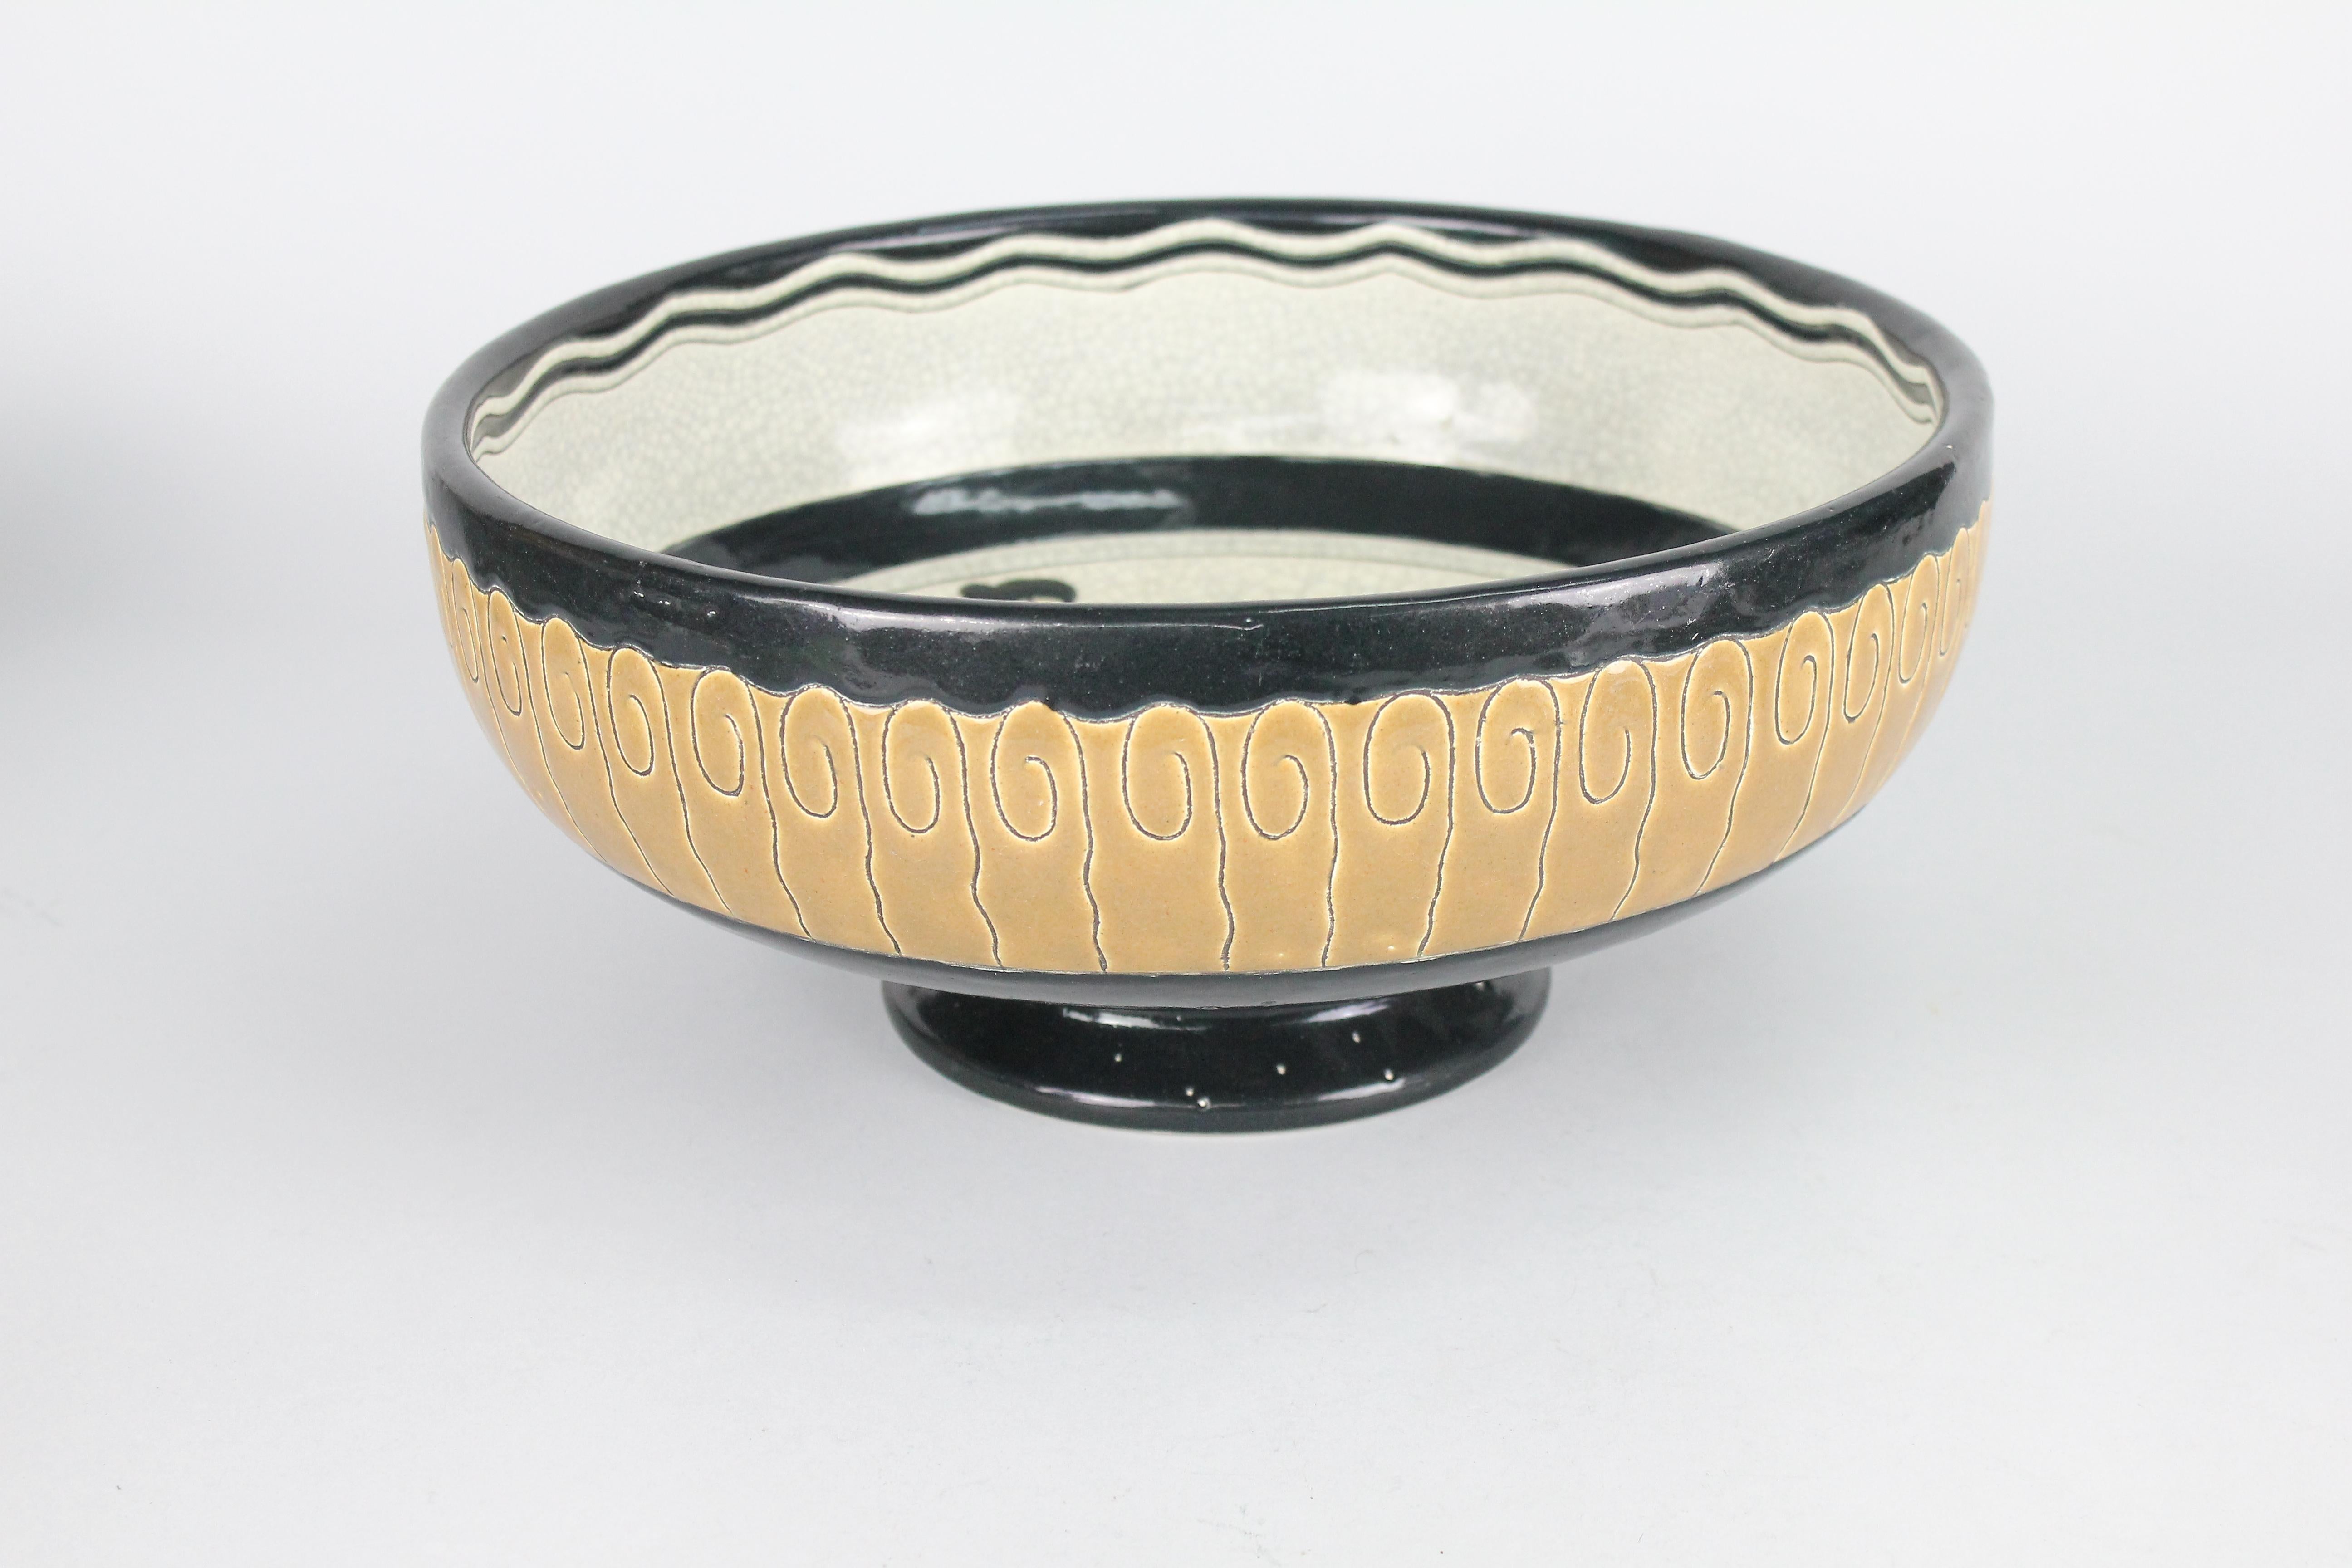 French Art Deco enamel-glazed ceramic footed bowl by Longwy (France) from the Primavera period while the factory was under the direction of Rene Buthaud. This lovely bowl is beautifully decorated. This is as much Art Deco as it gets. 

À partir de